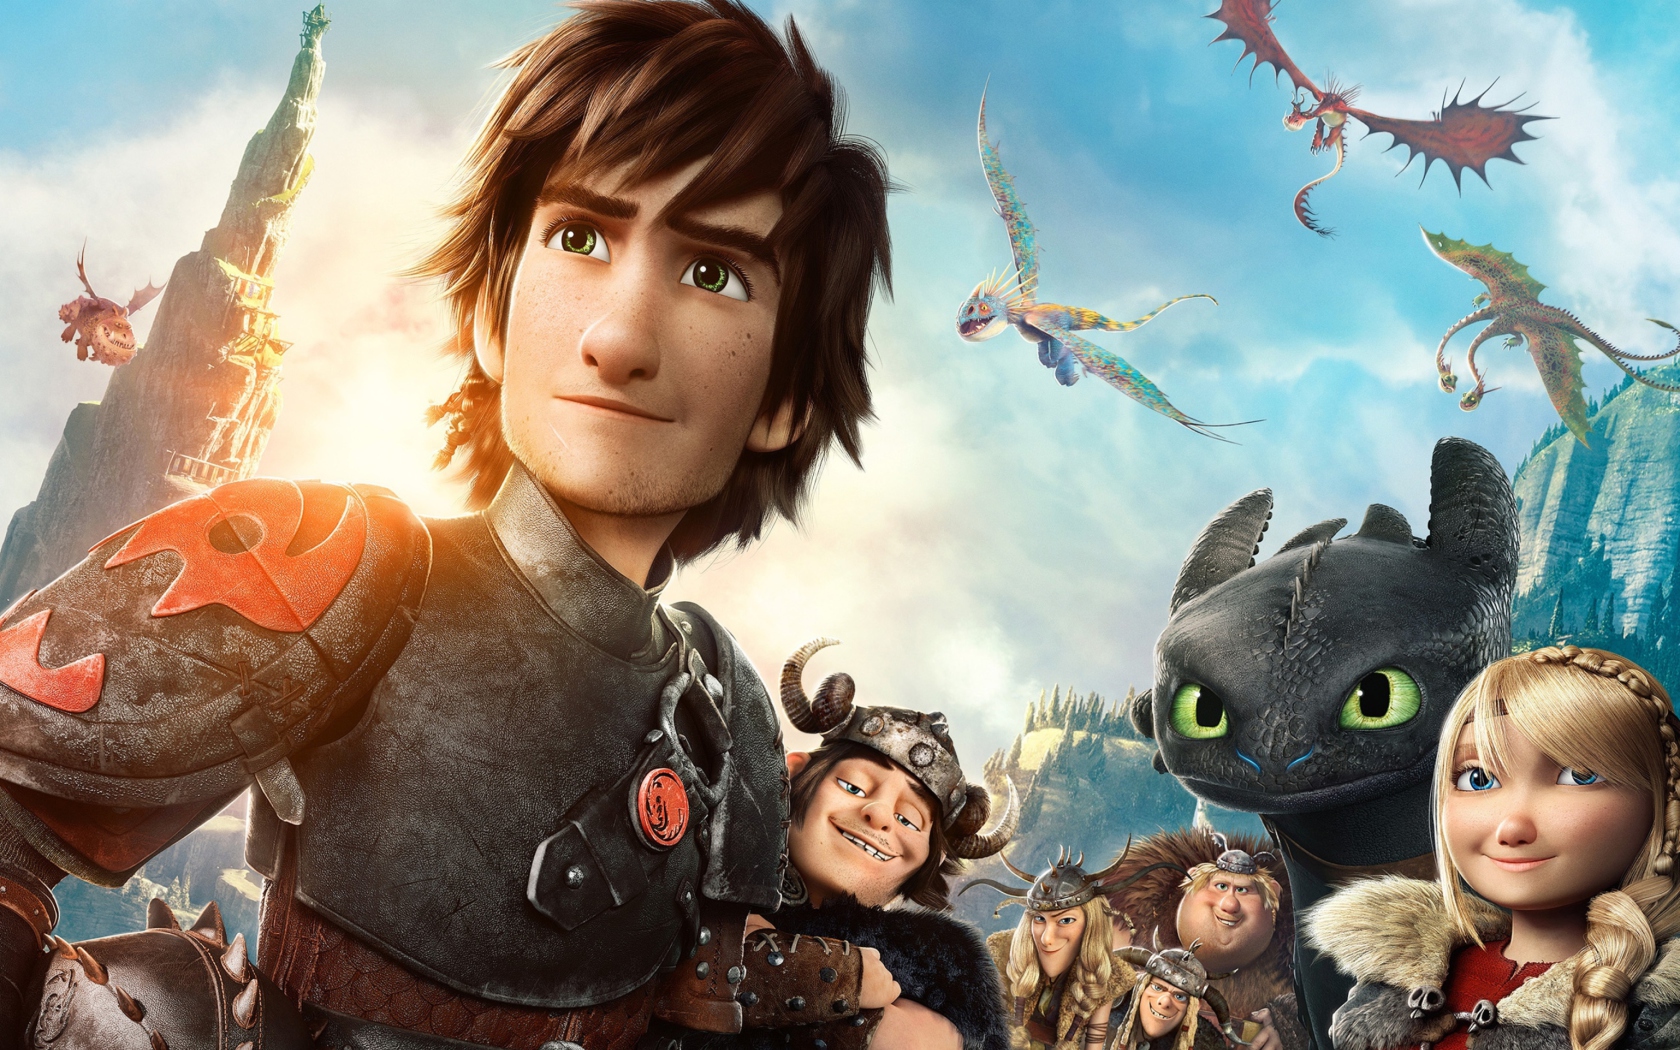 How To Train Your Dragon 2 wallpaper 1680x1050